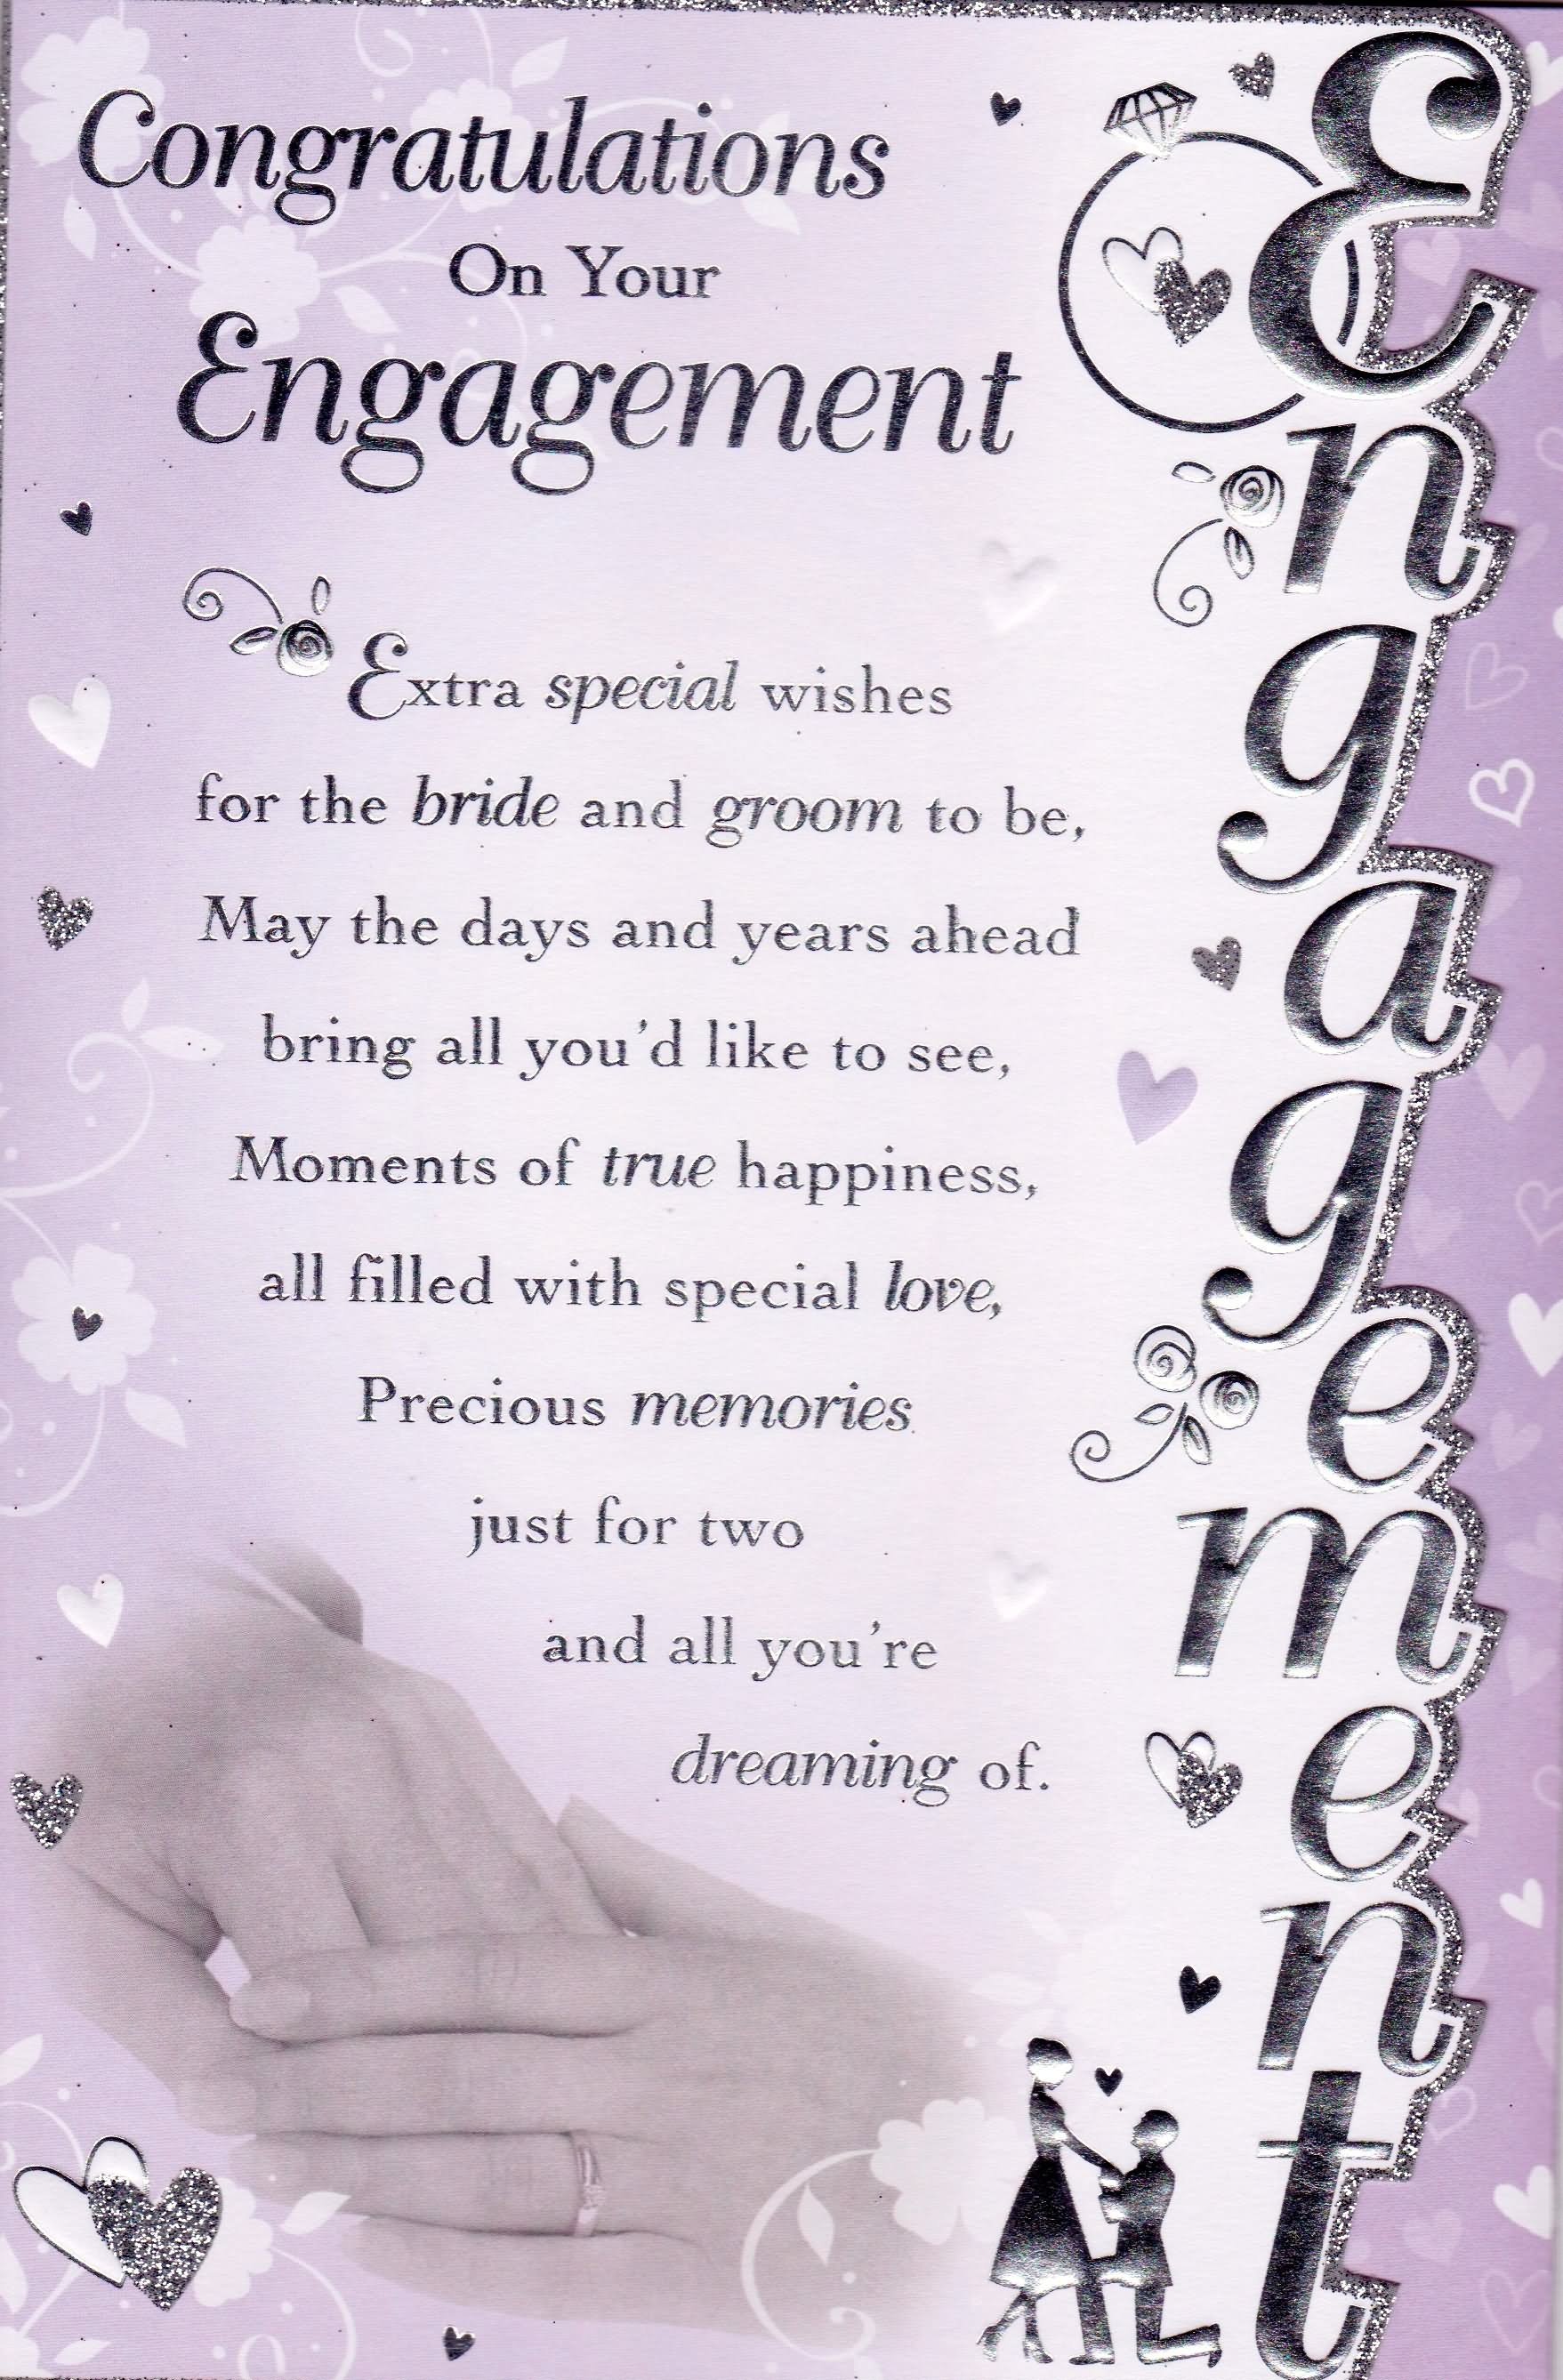 Congratulations On Your Engagement Greeting Card